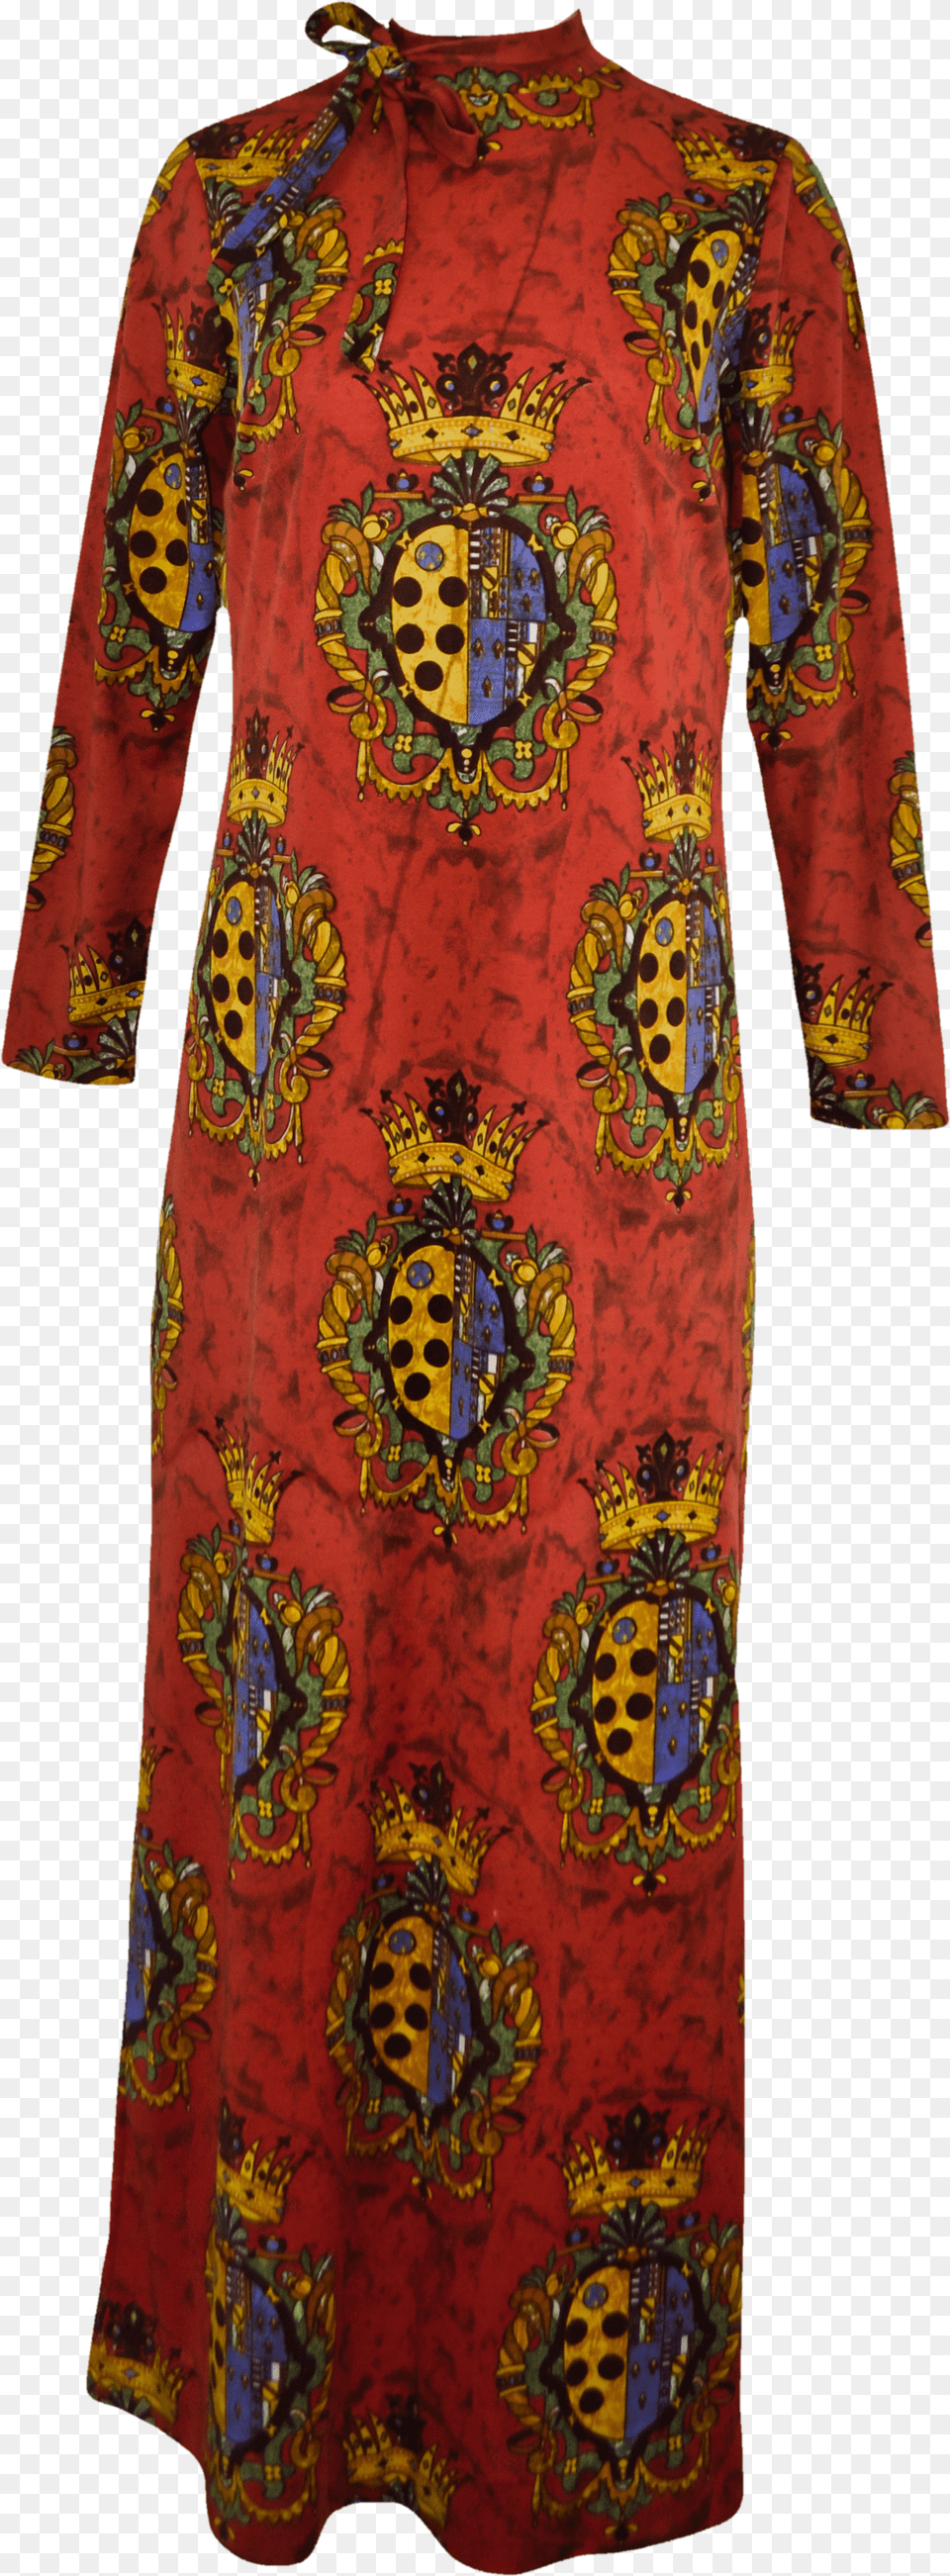 Day Dress Png